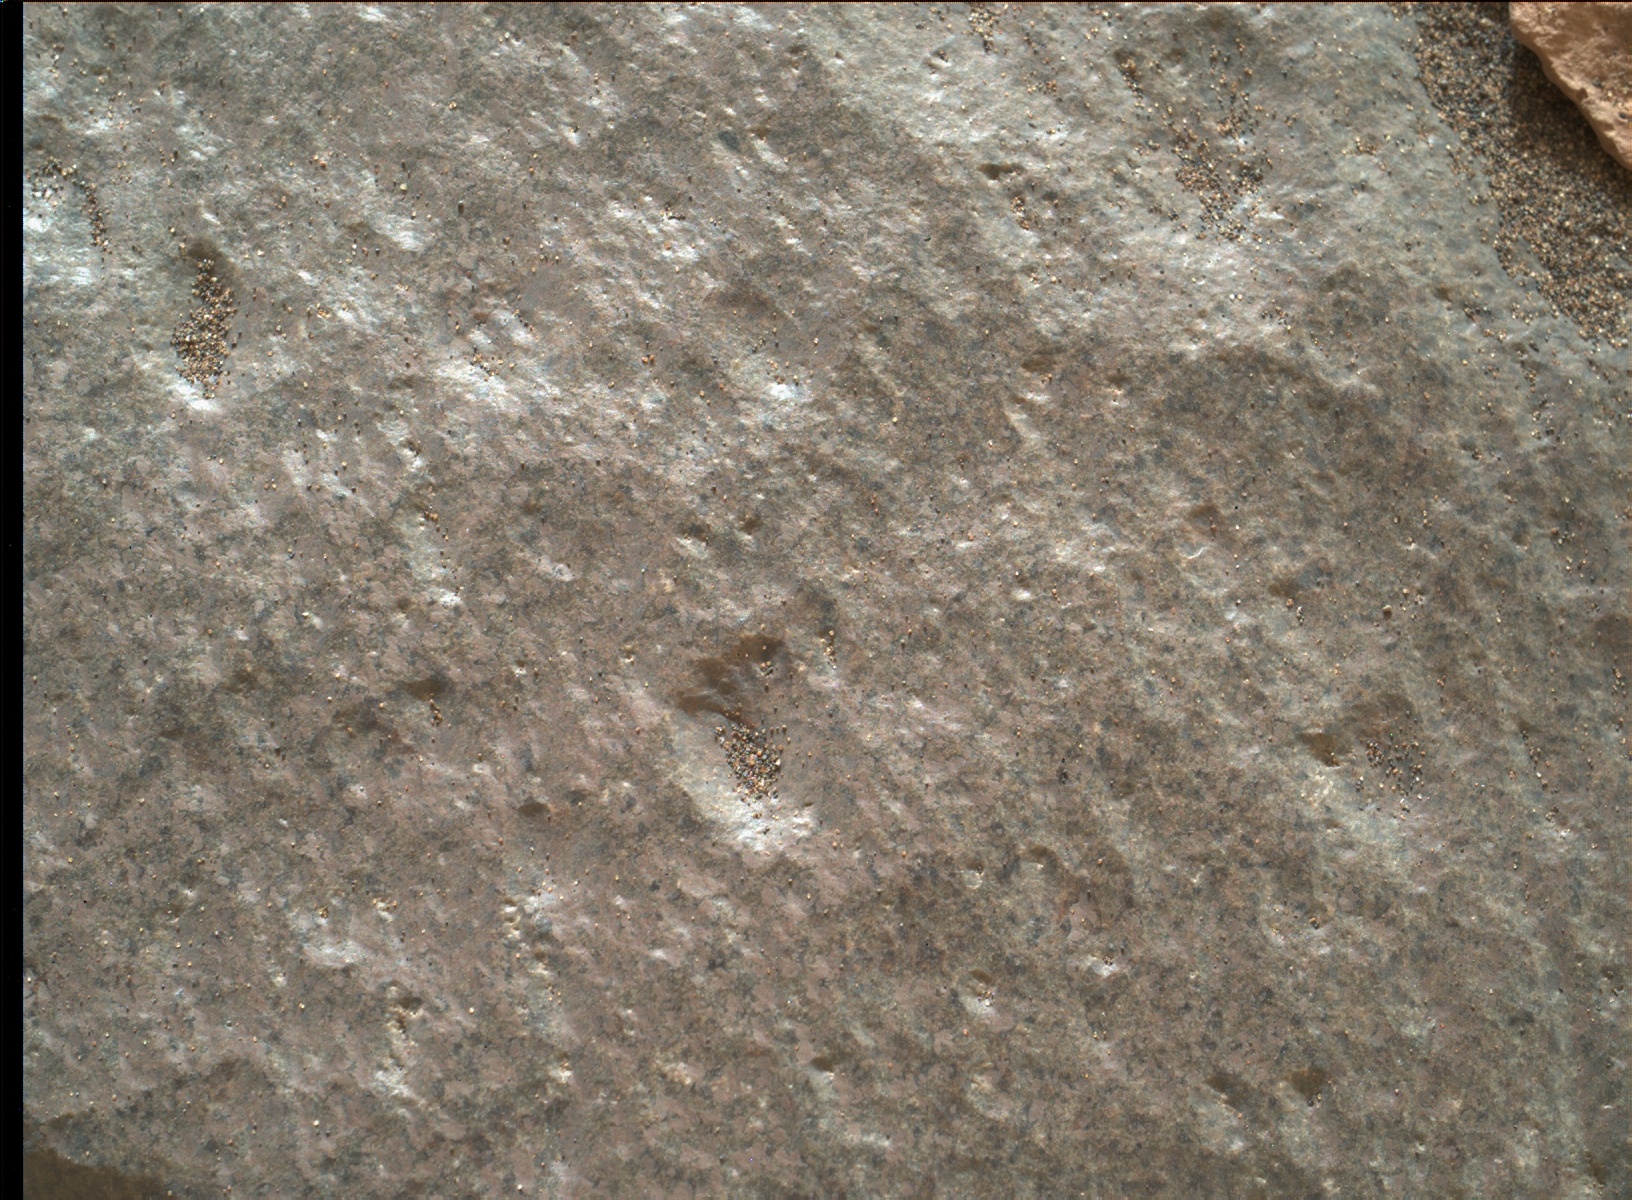 Nasa's Mars rover Curiosity acquired this image using its Mars Hand Lens Imager (MAHLI) on Sol 1606